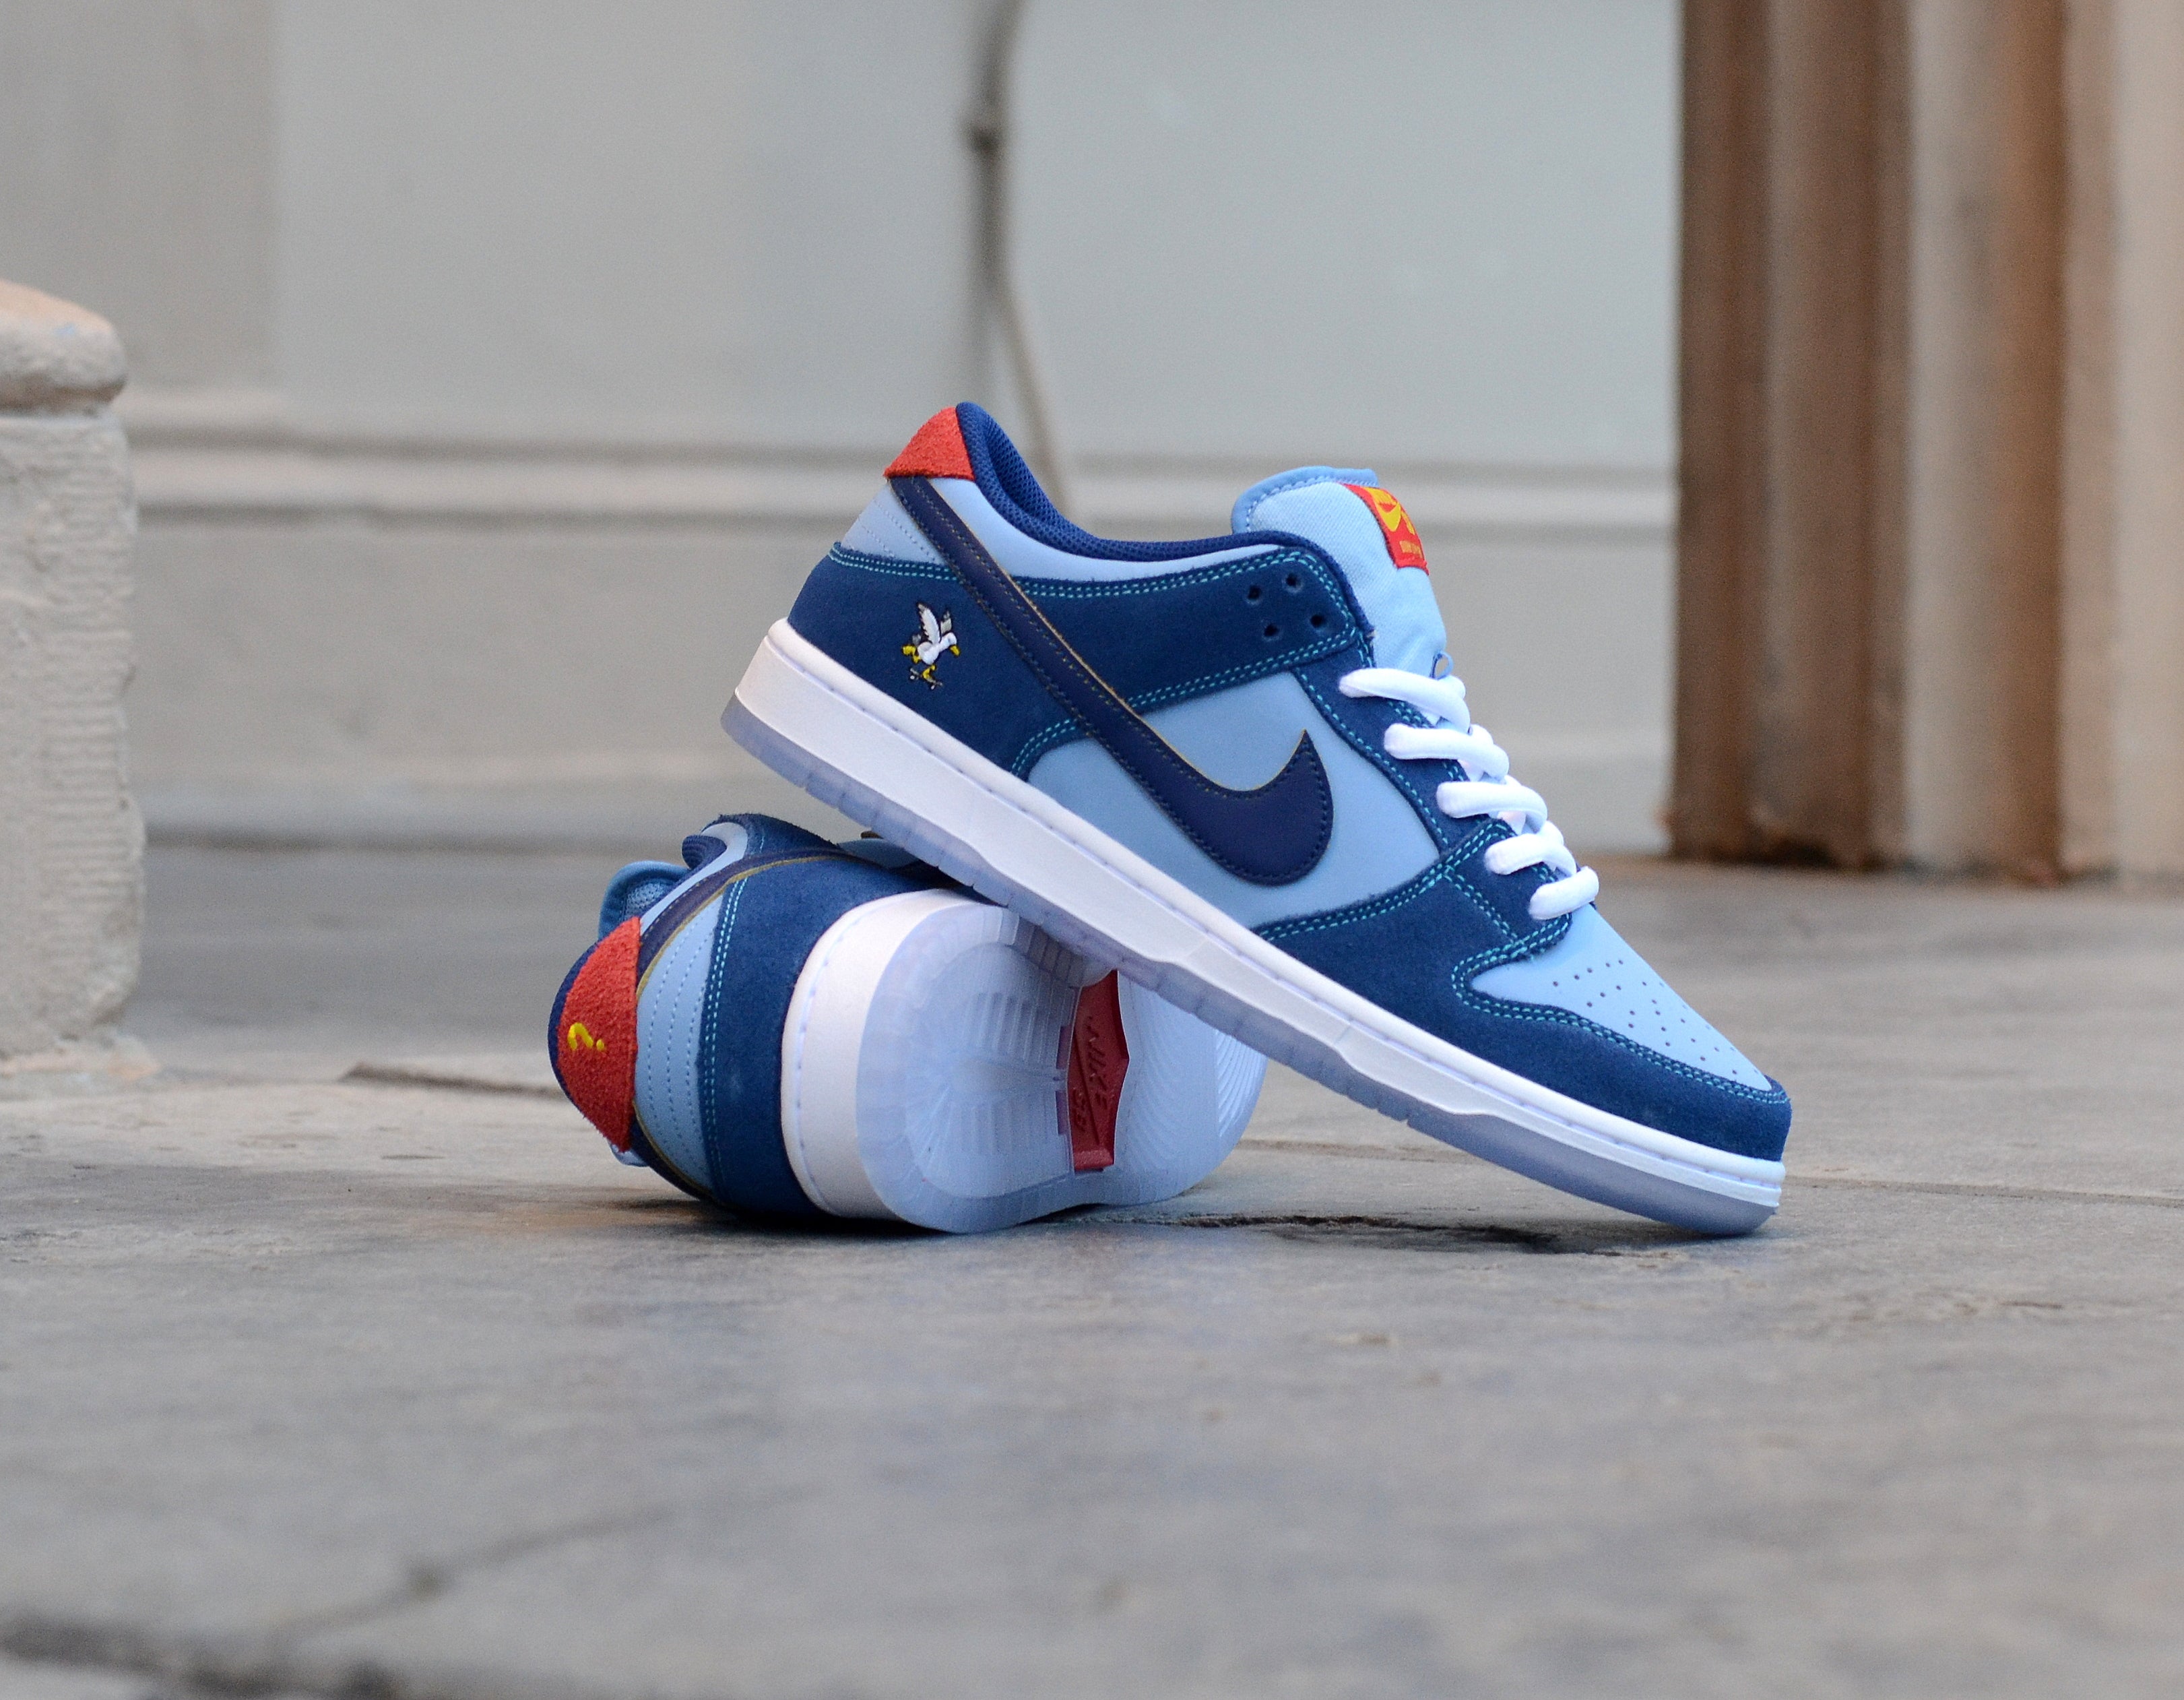 Nike SB Why So Sad? Dunk Low – Sparky Online Store